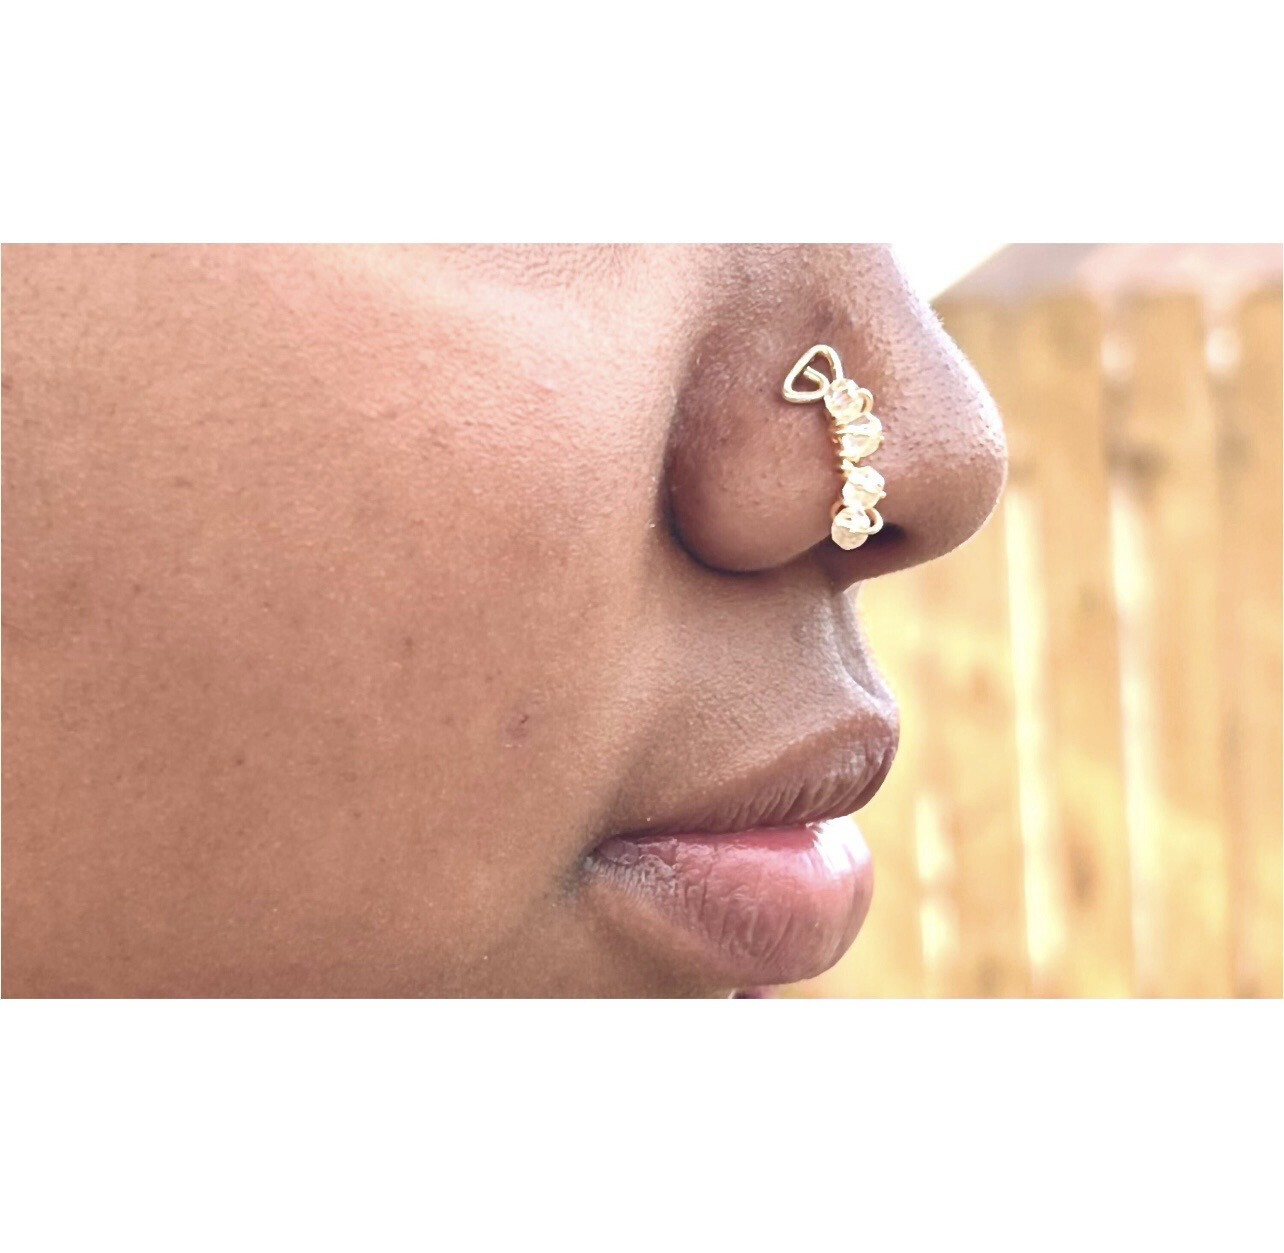 I love my new nose ring! I'm going to wear it everywhere. #nosepiercings  BRIDE : @heena.gajera_67 Photograph by : @hard_films.in &… | Instagram